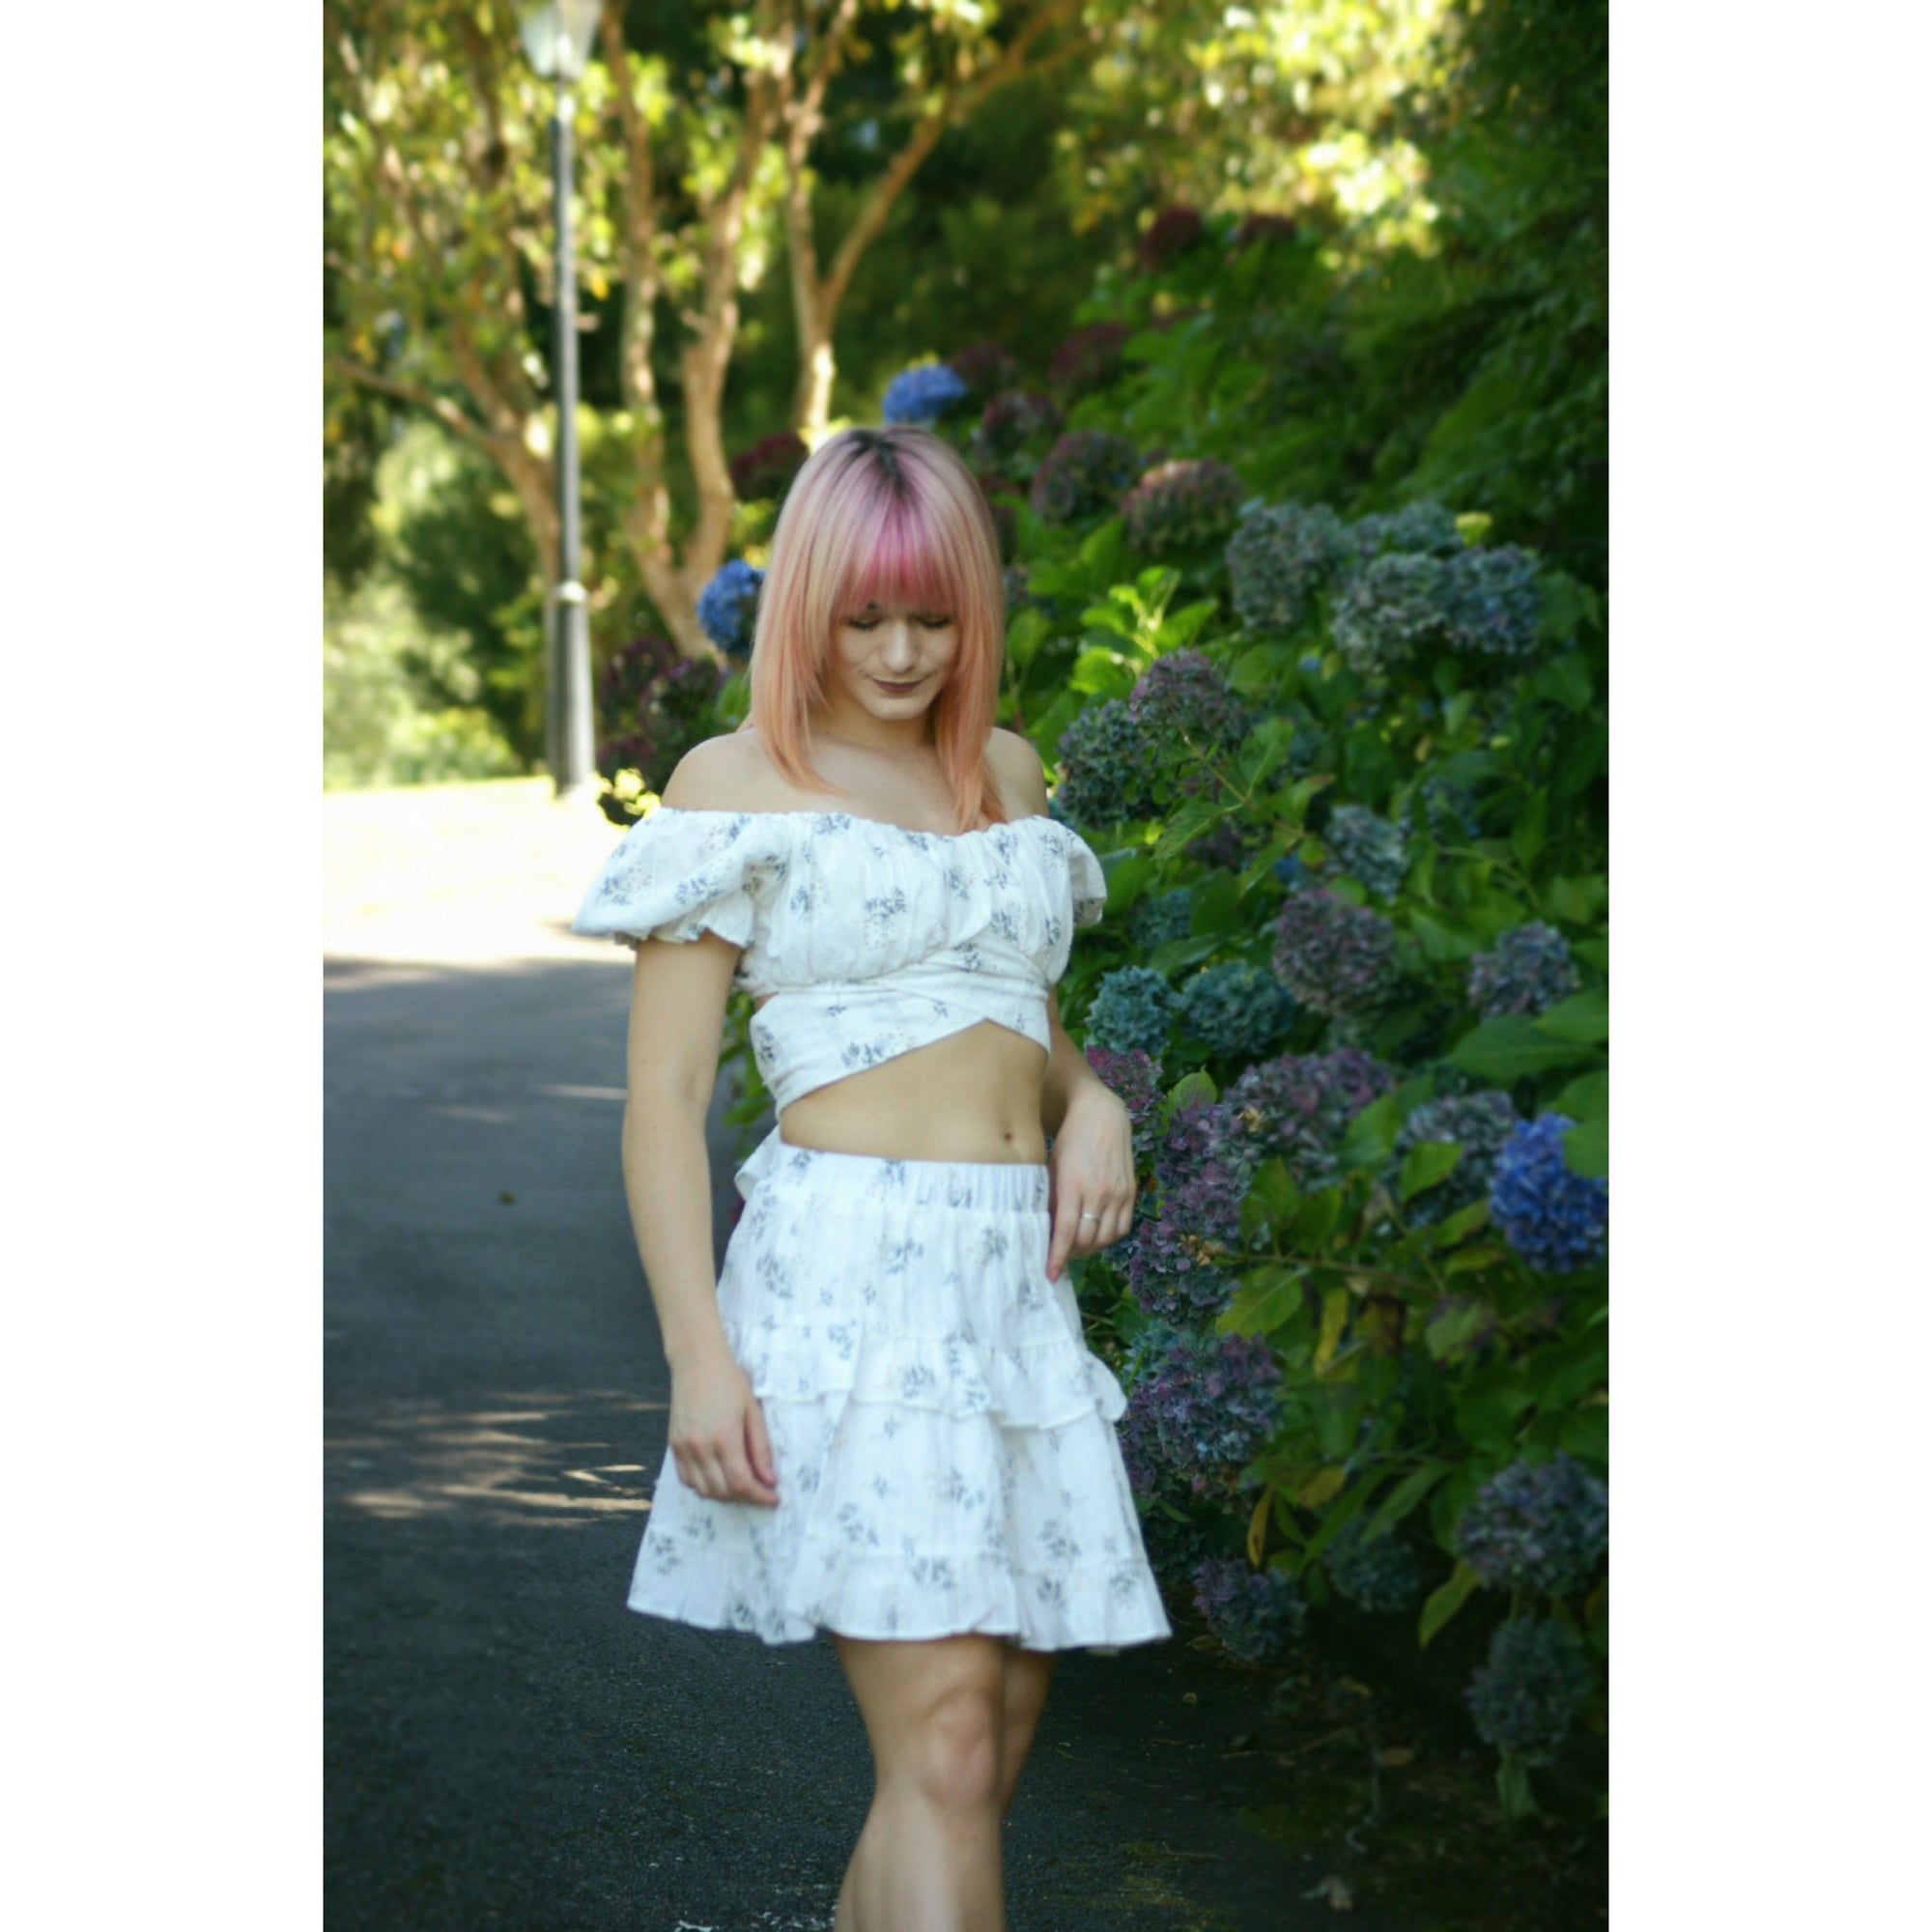 Miller Skirt - White Floral Not specified